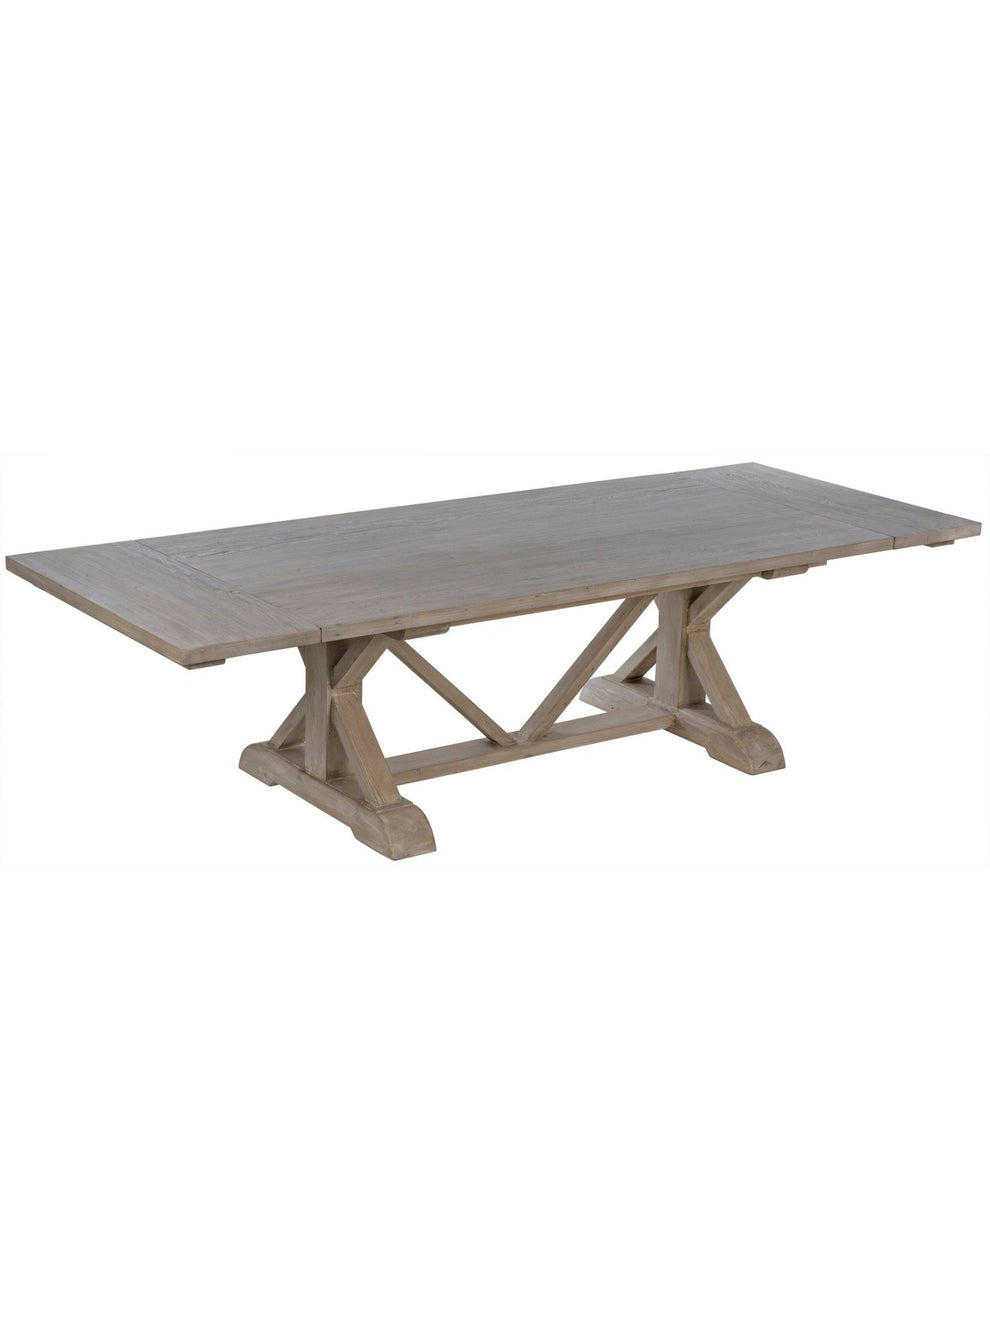 CFC Furniture | Rosario Extension Dining Table, 8 feet - Free Ship ...